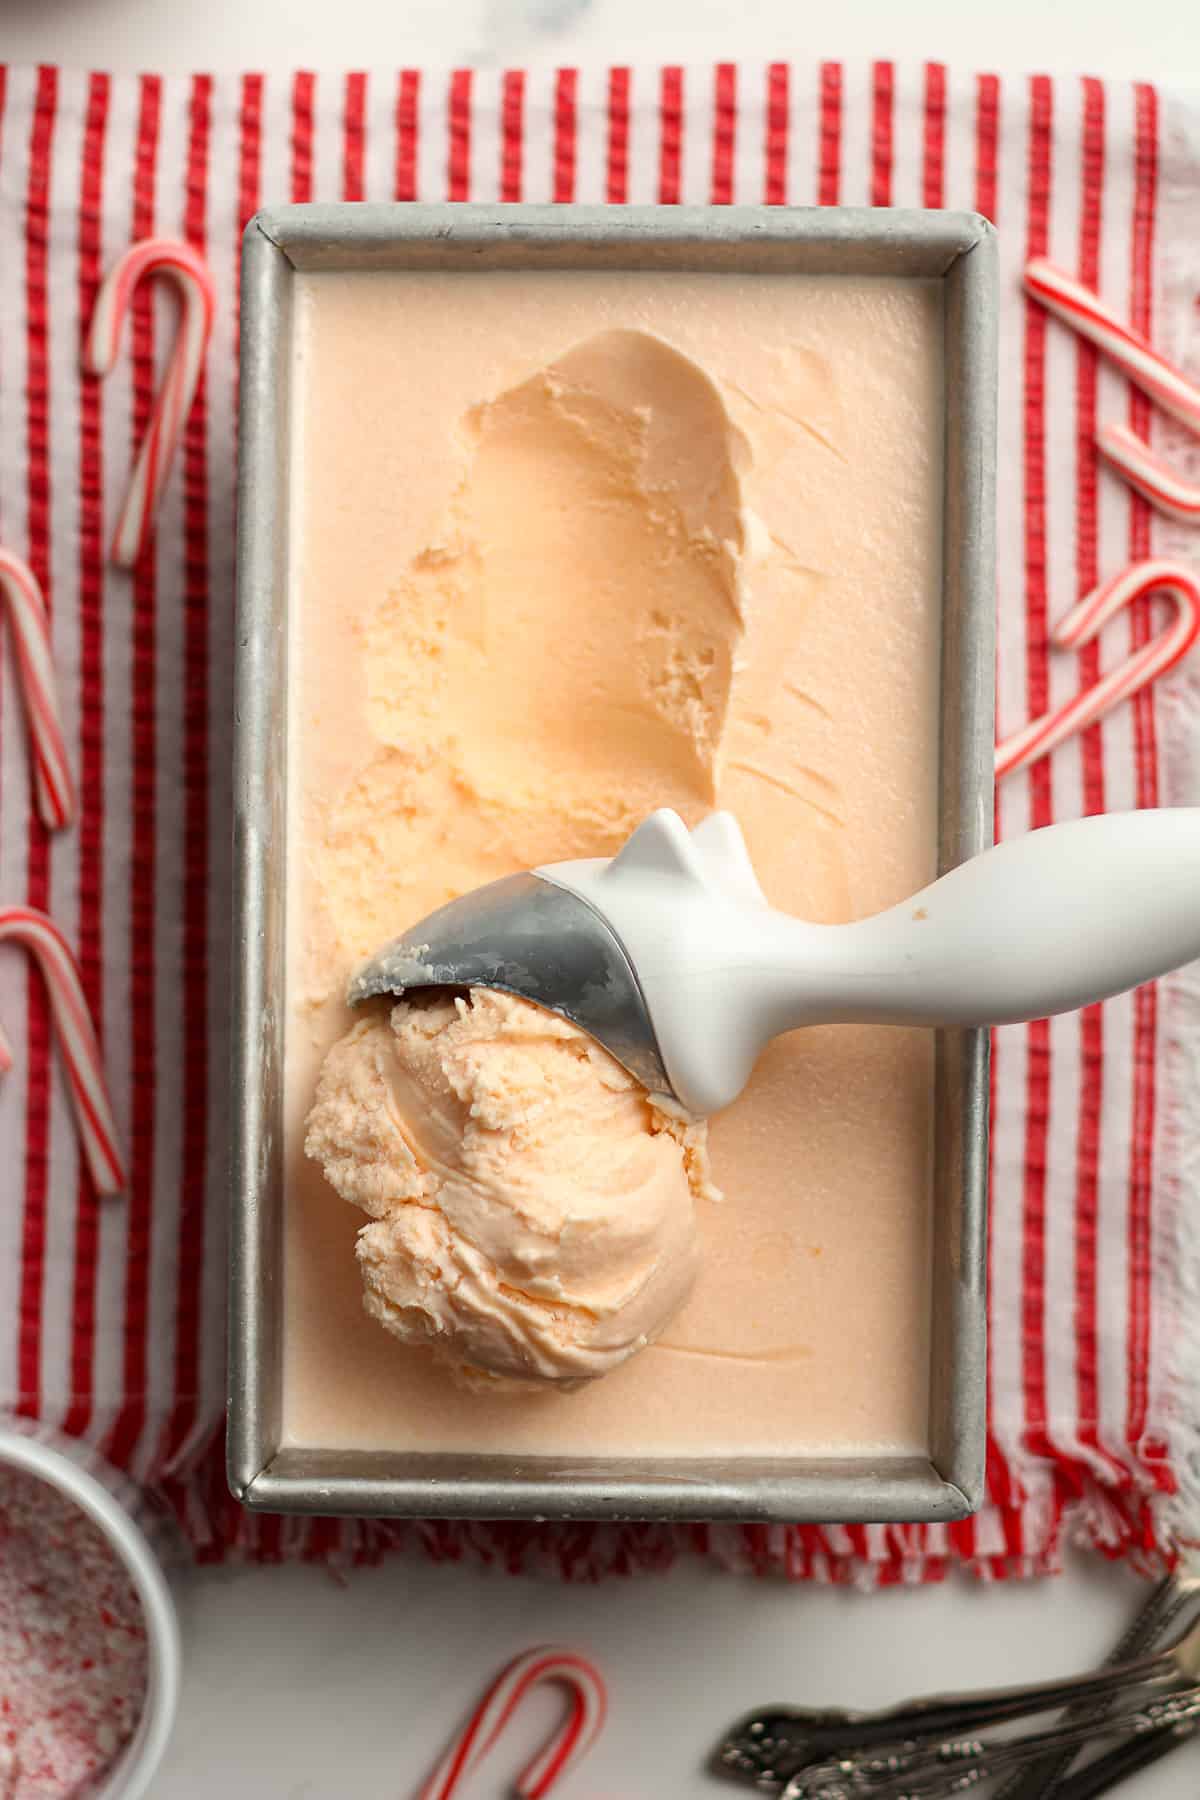 A pan of homemade peppermint ice cream with a scoop.